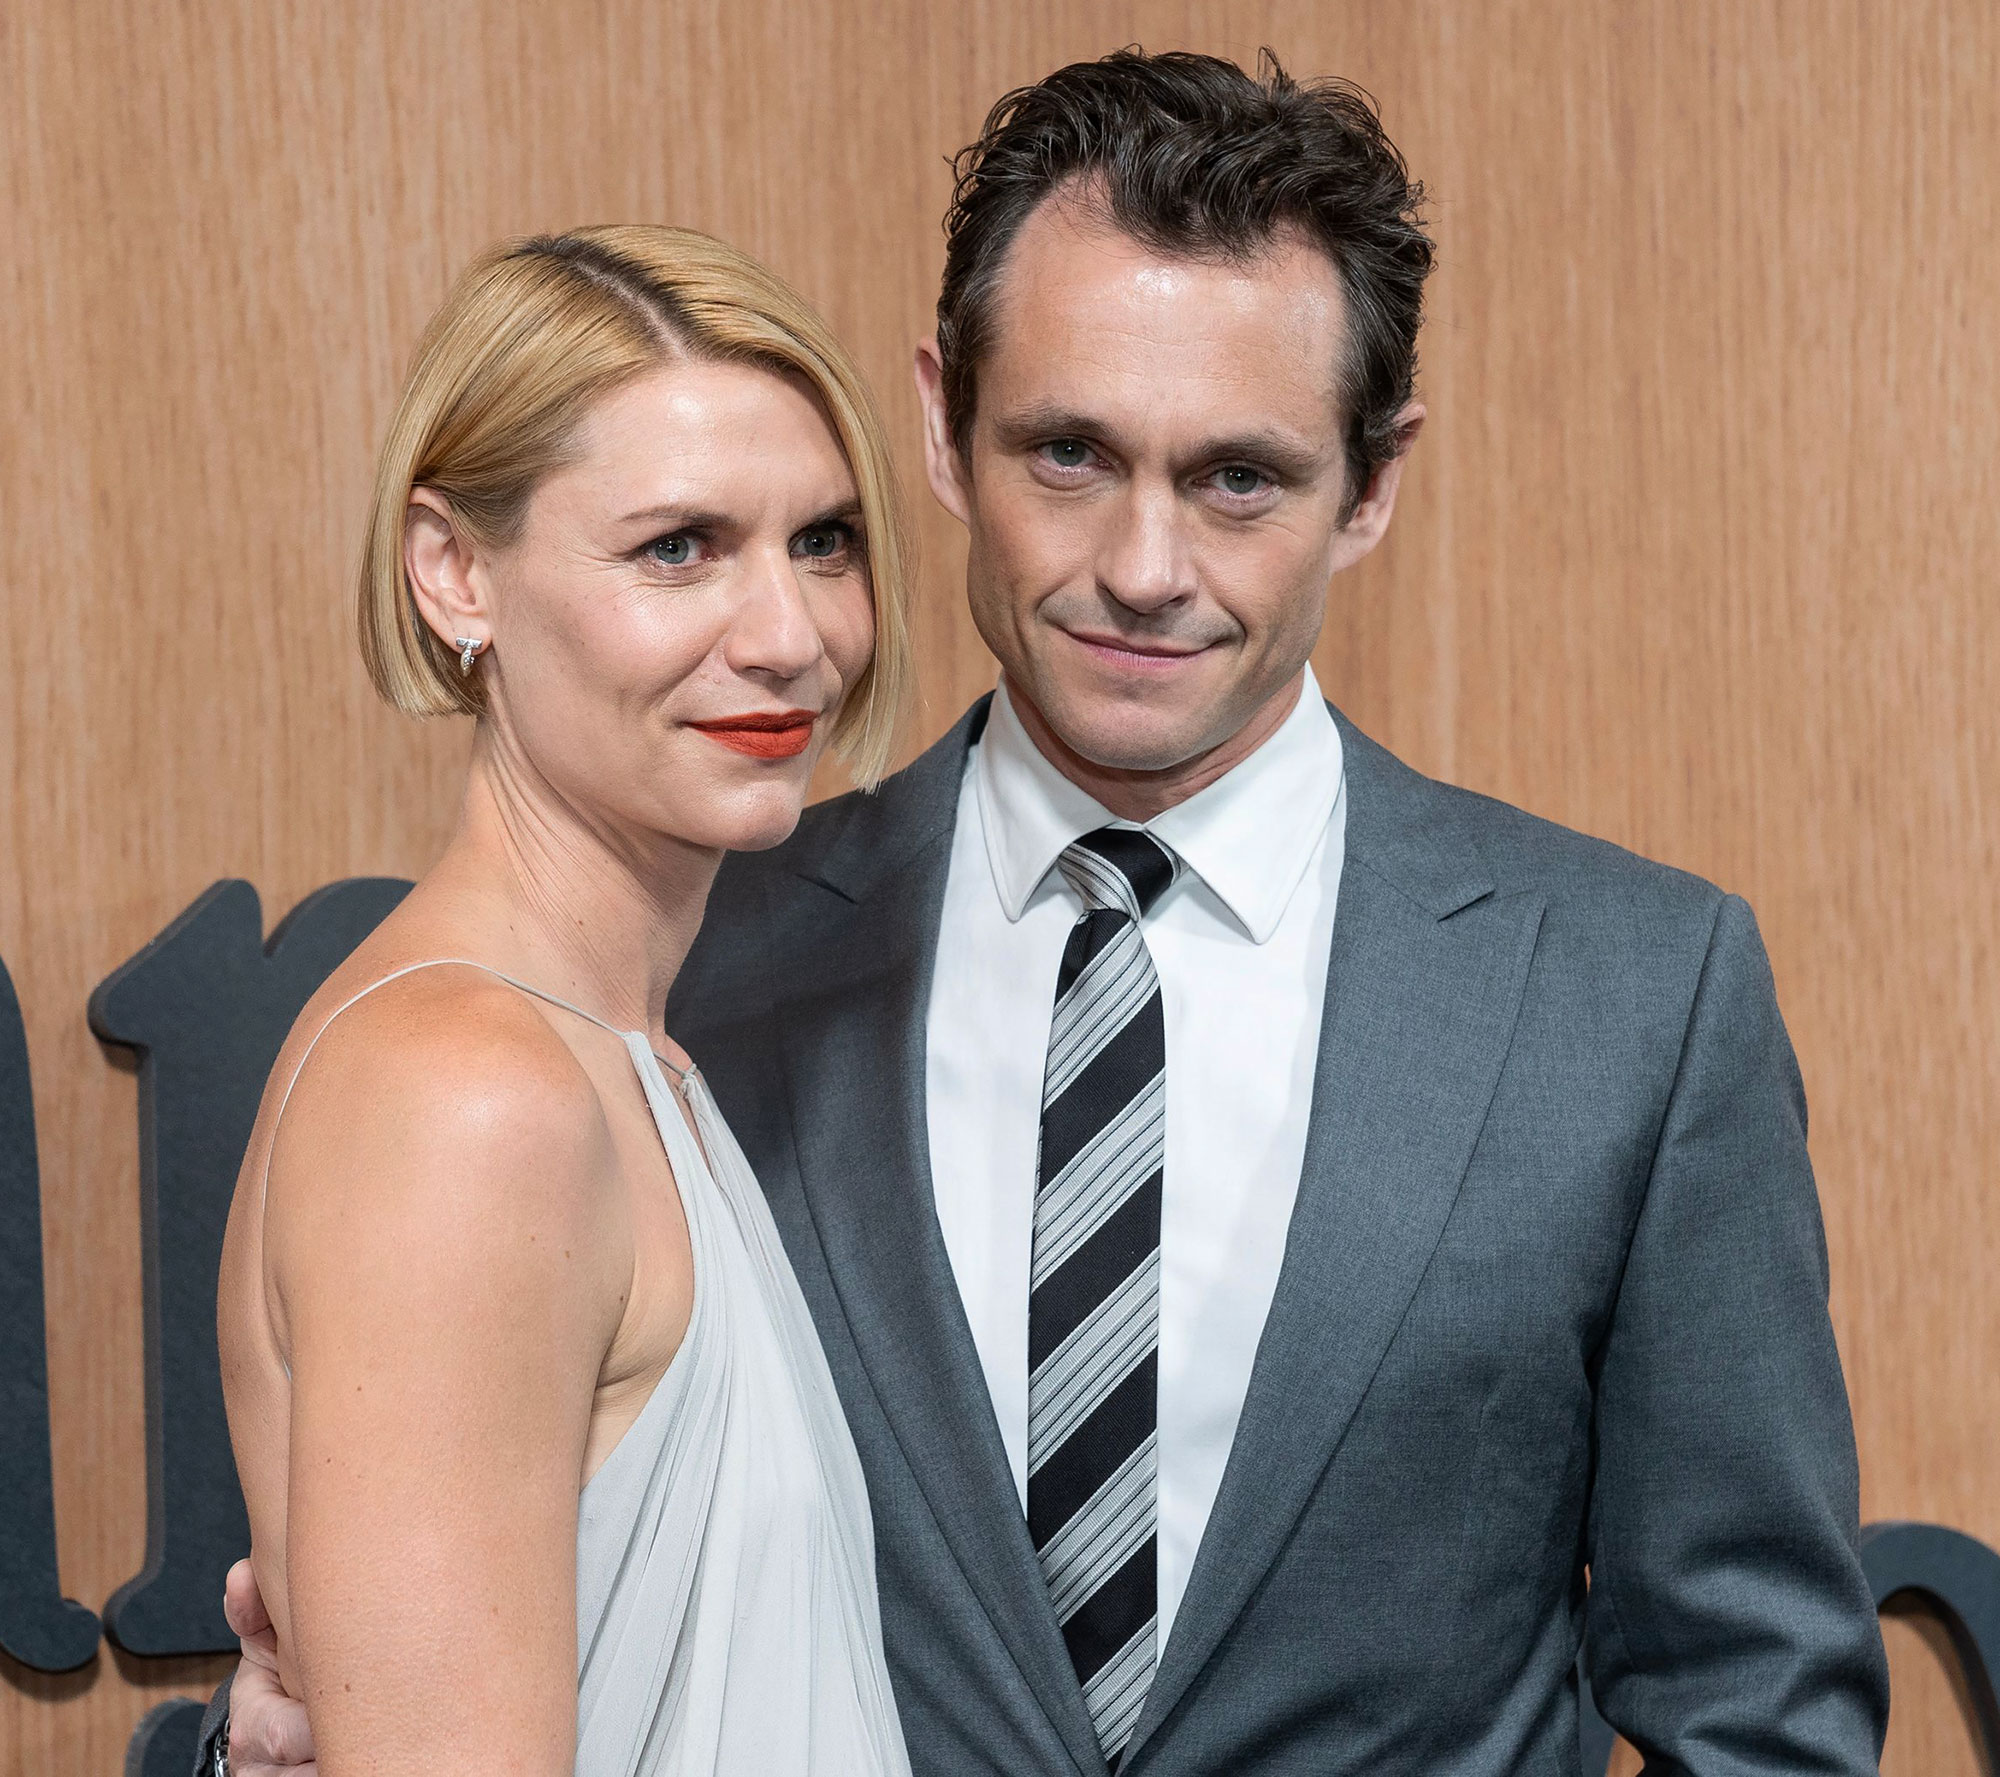 Claire Danes says her son asked her to give baby No. 3 away